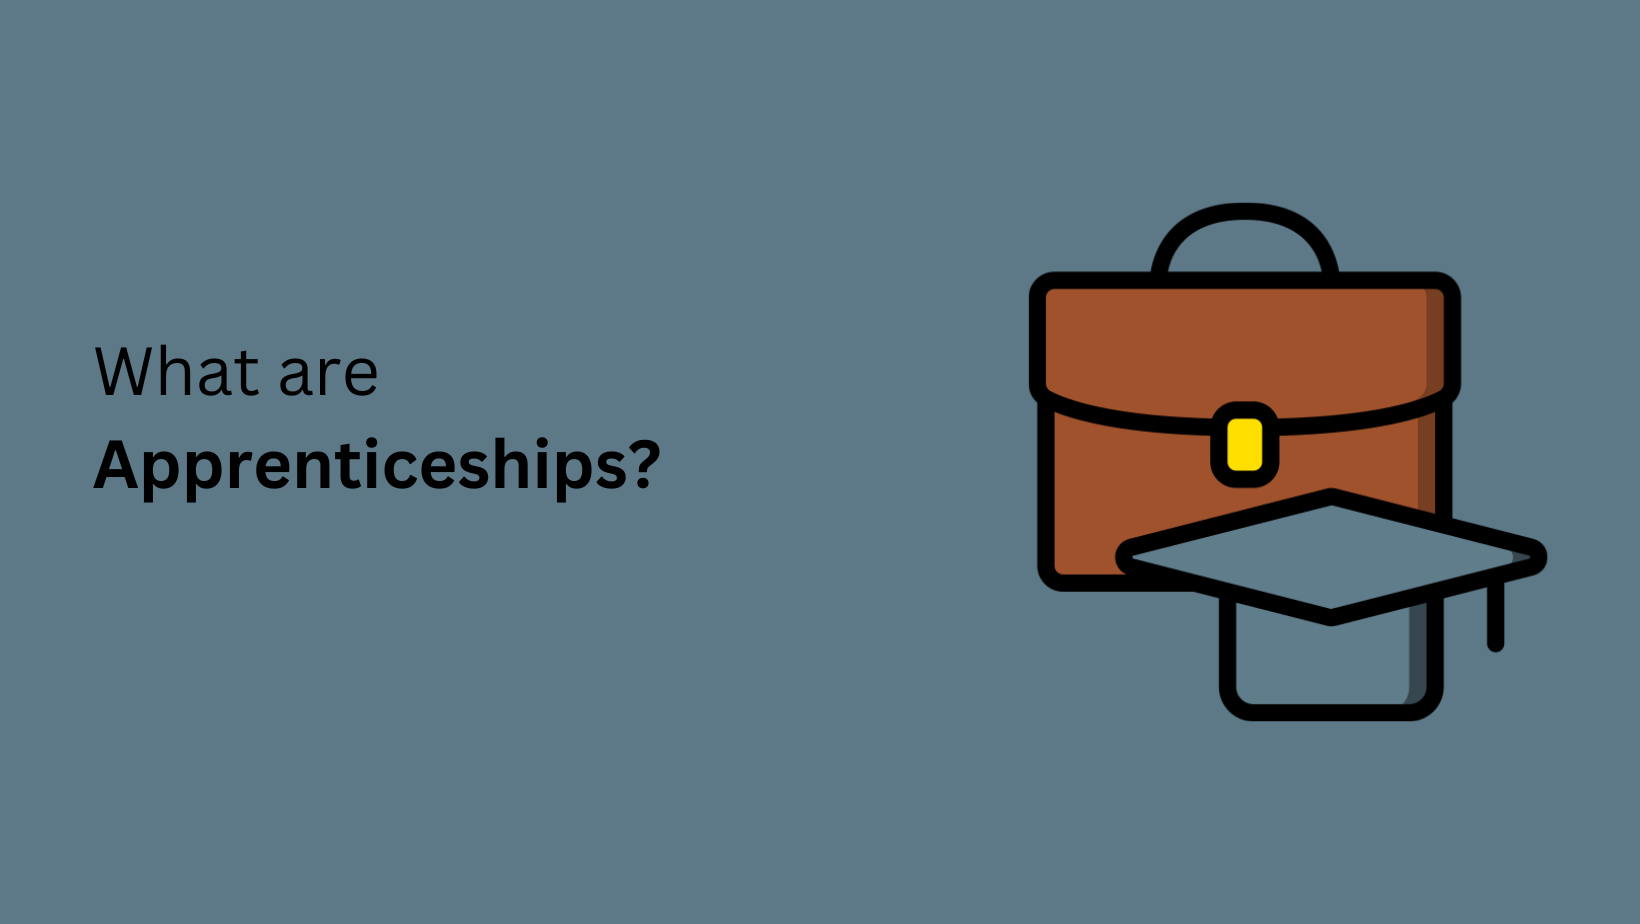 What are Apprenticeships